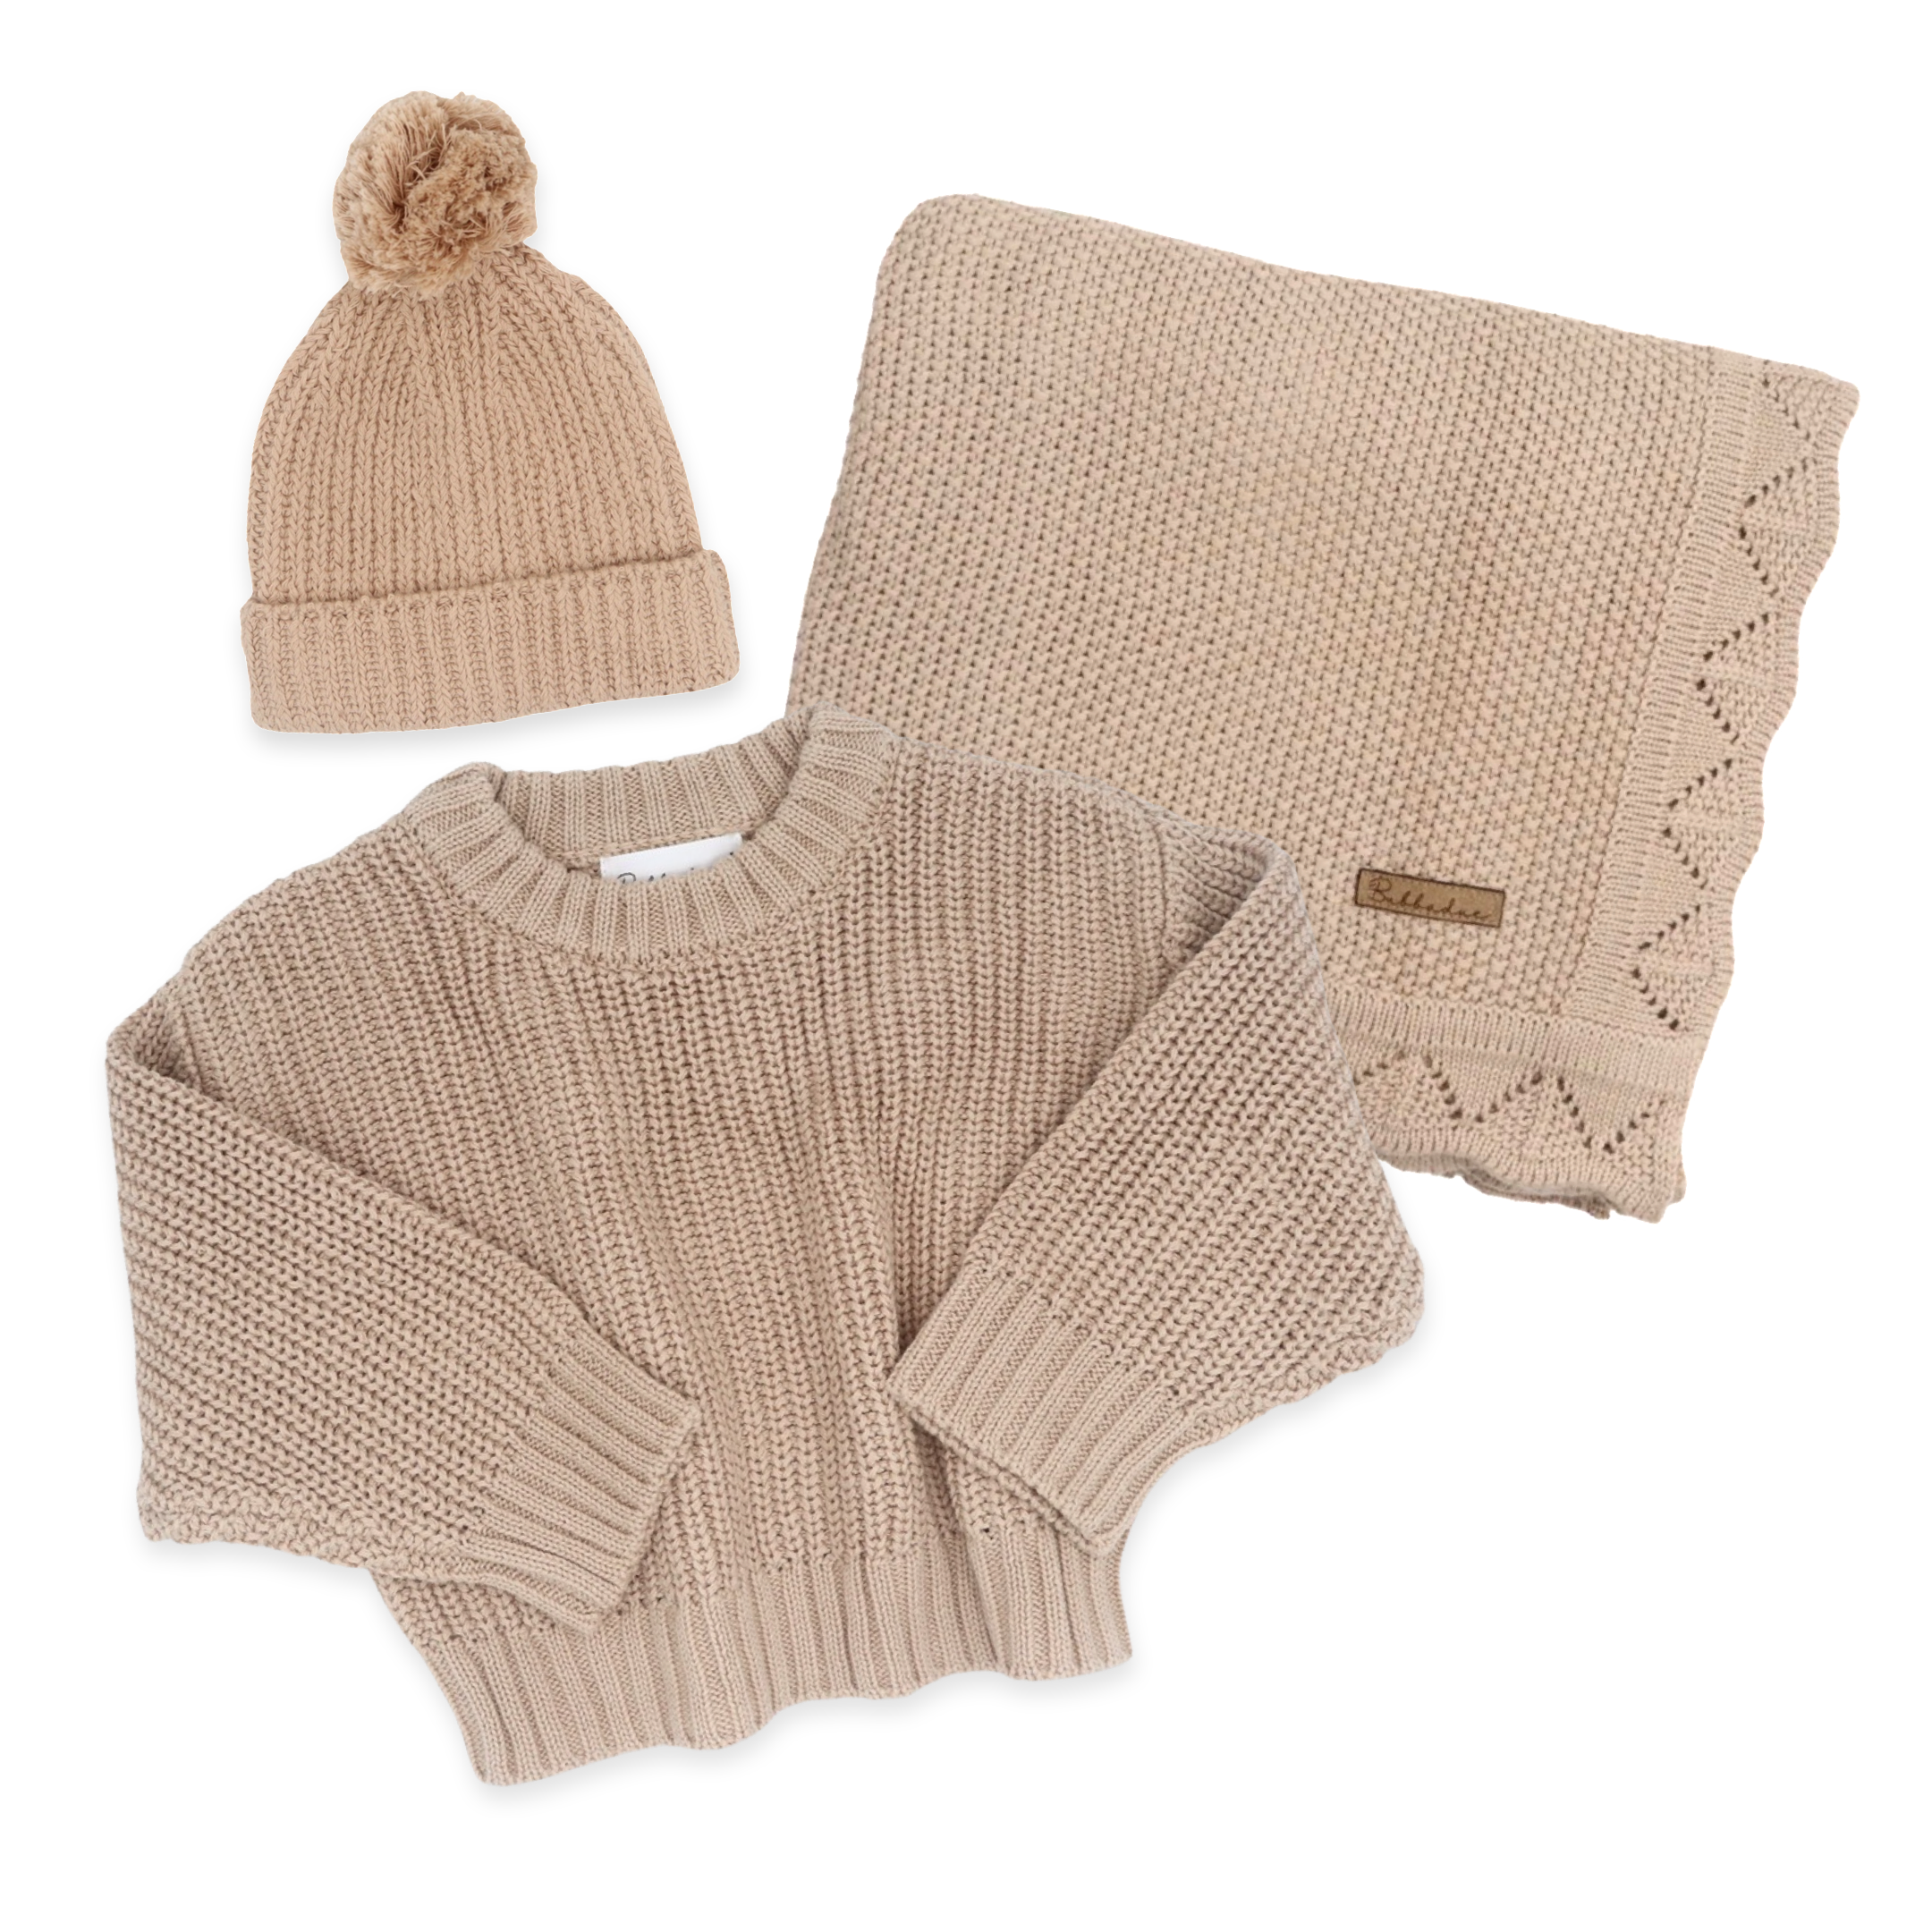 Bubbadue Knitted Baby Jersey, Beanie & Blanket Set - Toffee - Bubbadue